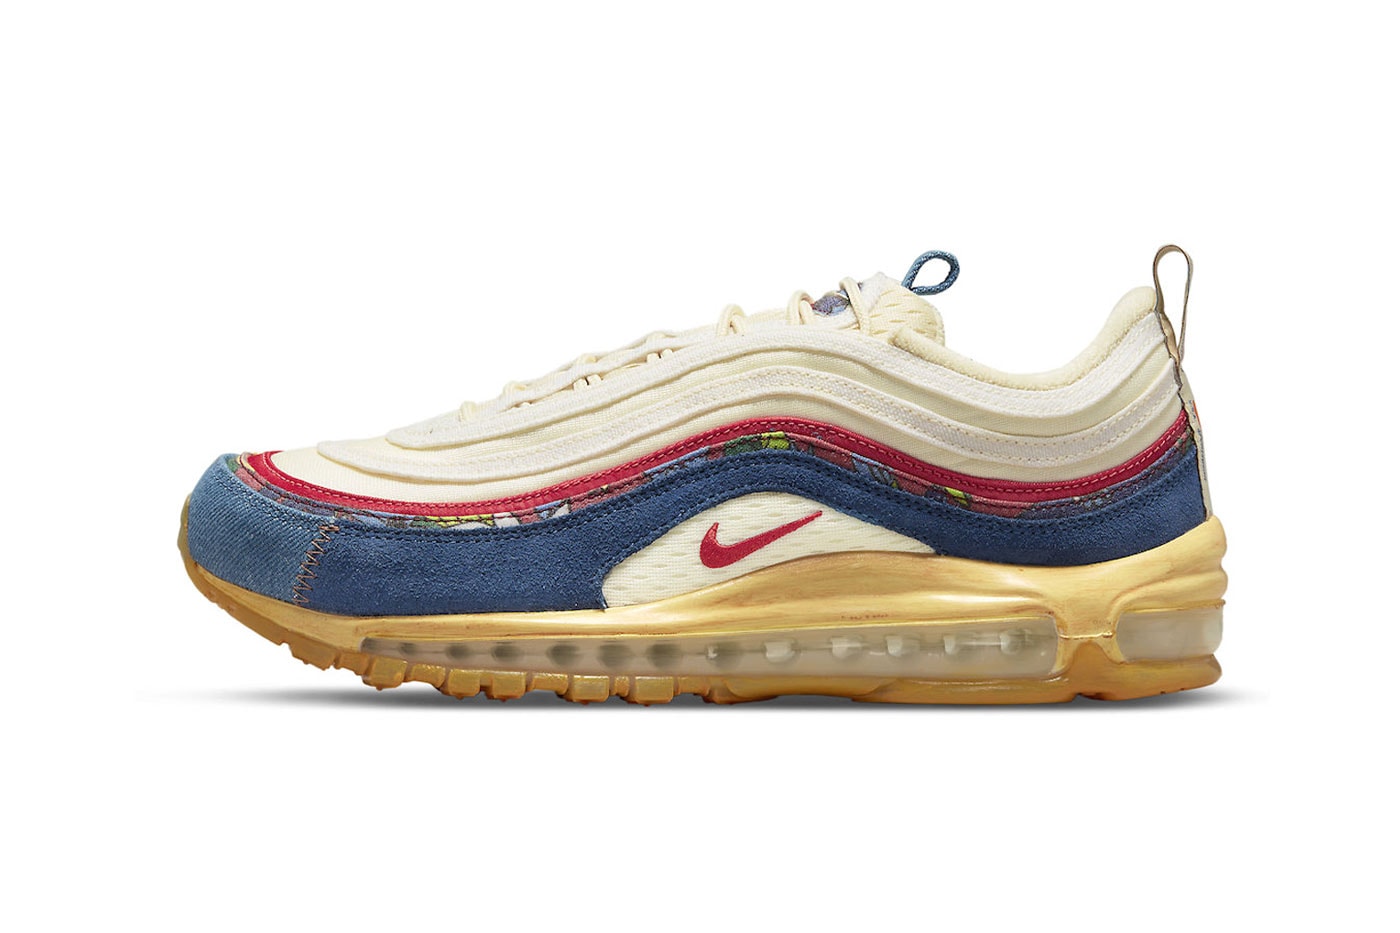 Nike Air Max 97 Coconut Milk Fossil Official Look Release Info dv1486-162 Date Buy Price 